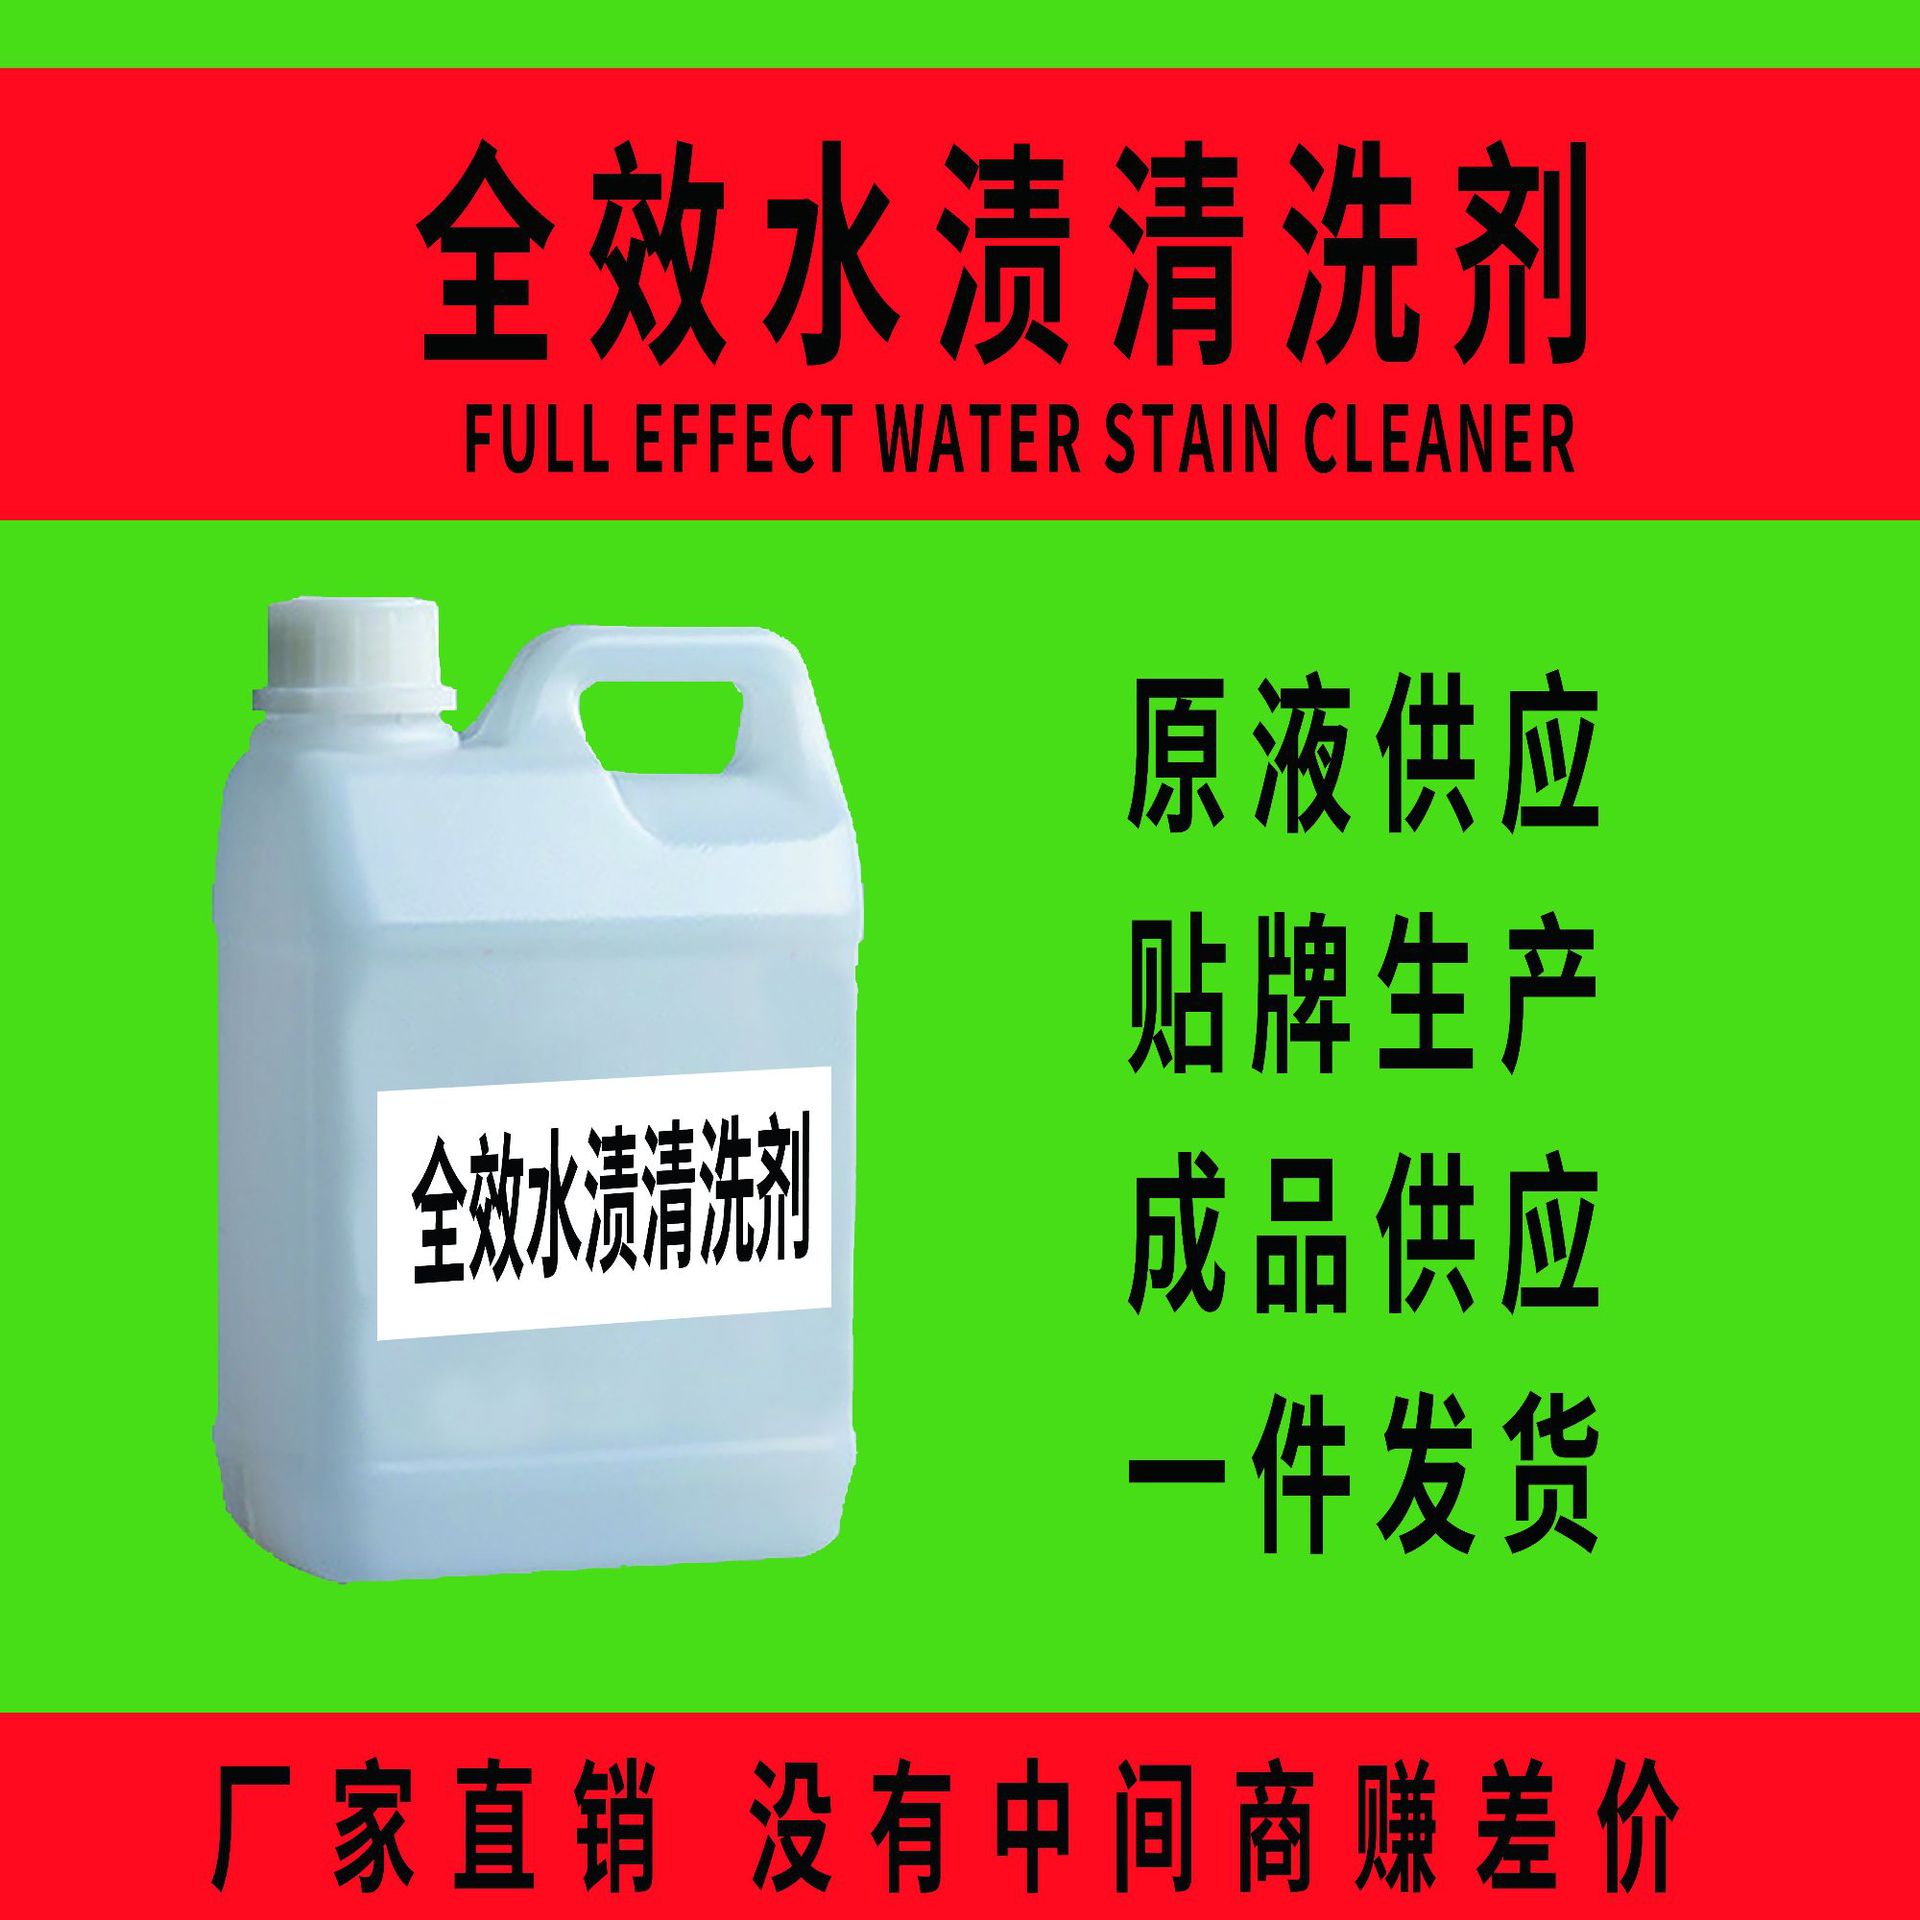 automobile Paint Water stain speckle Furring Watermark white Remove Acid Rain Car Wash clean Cleaning agent